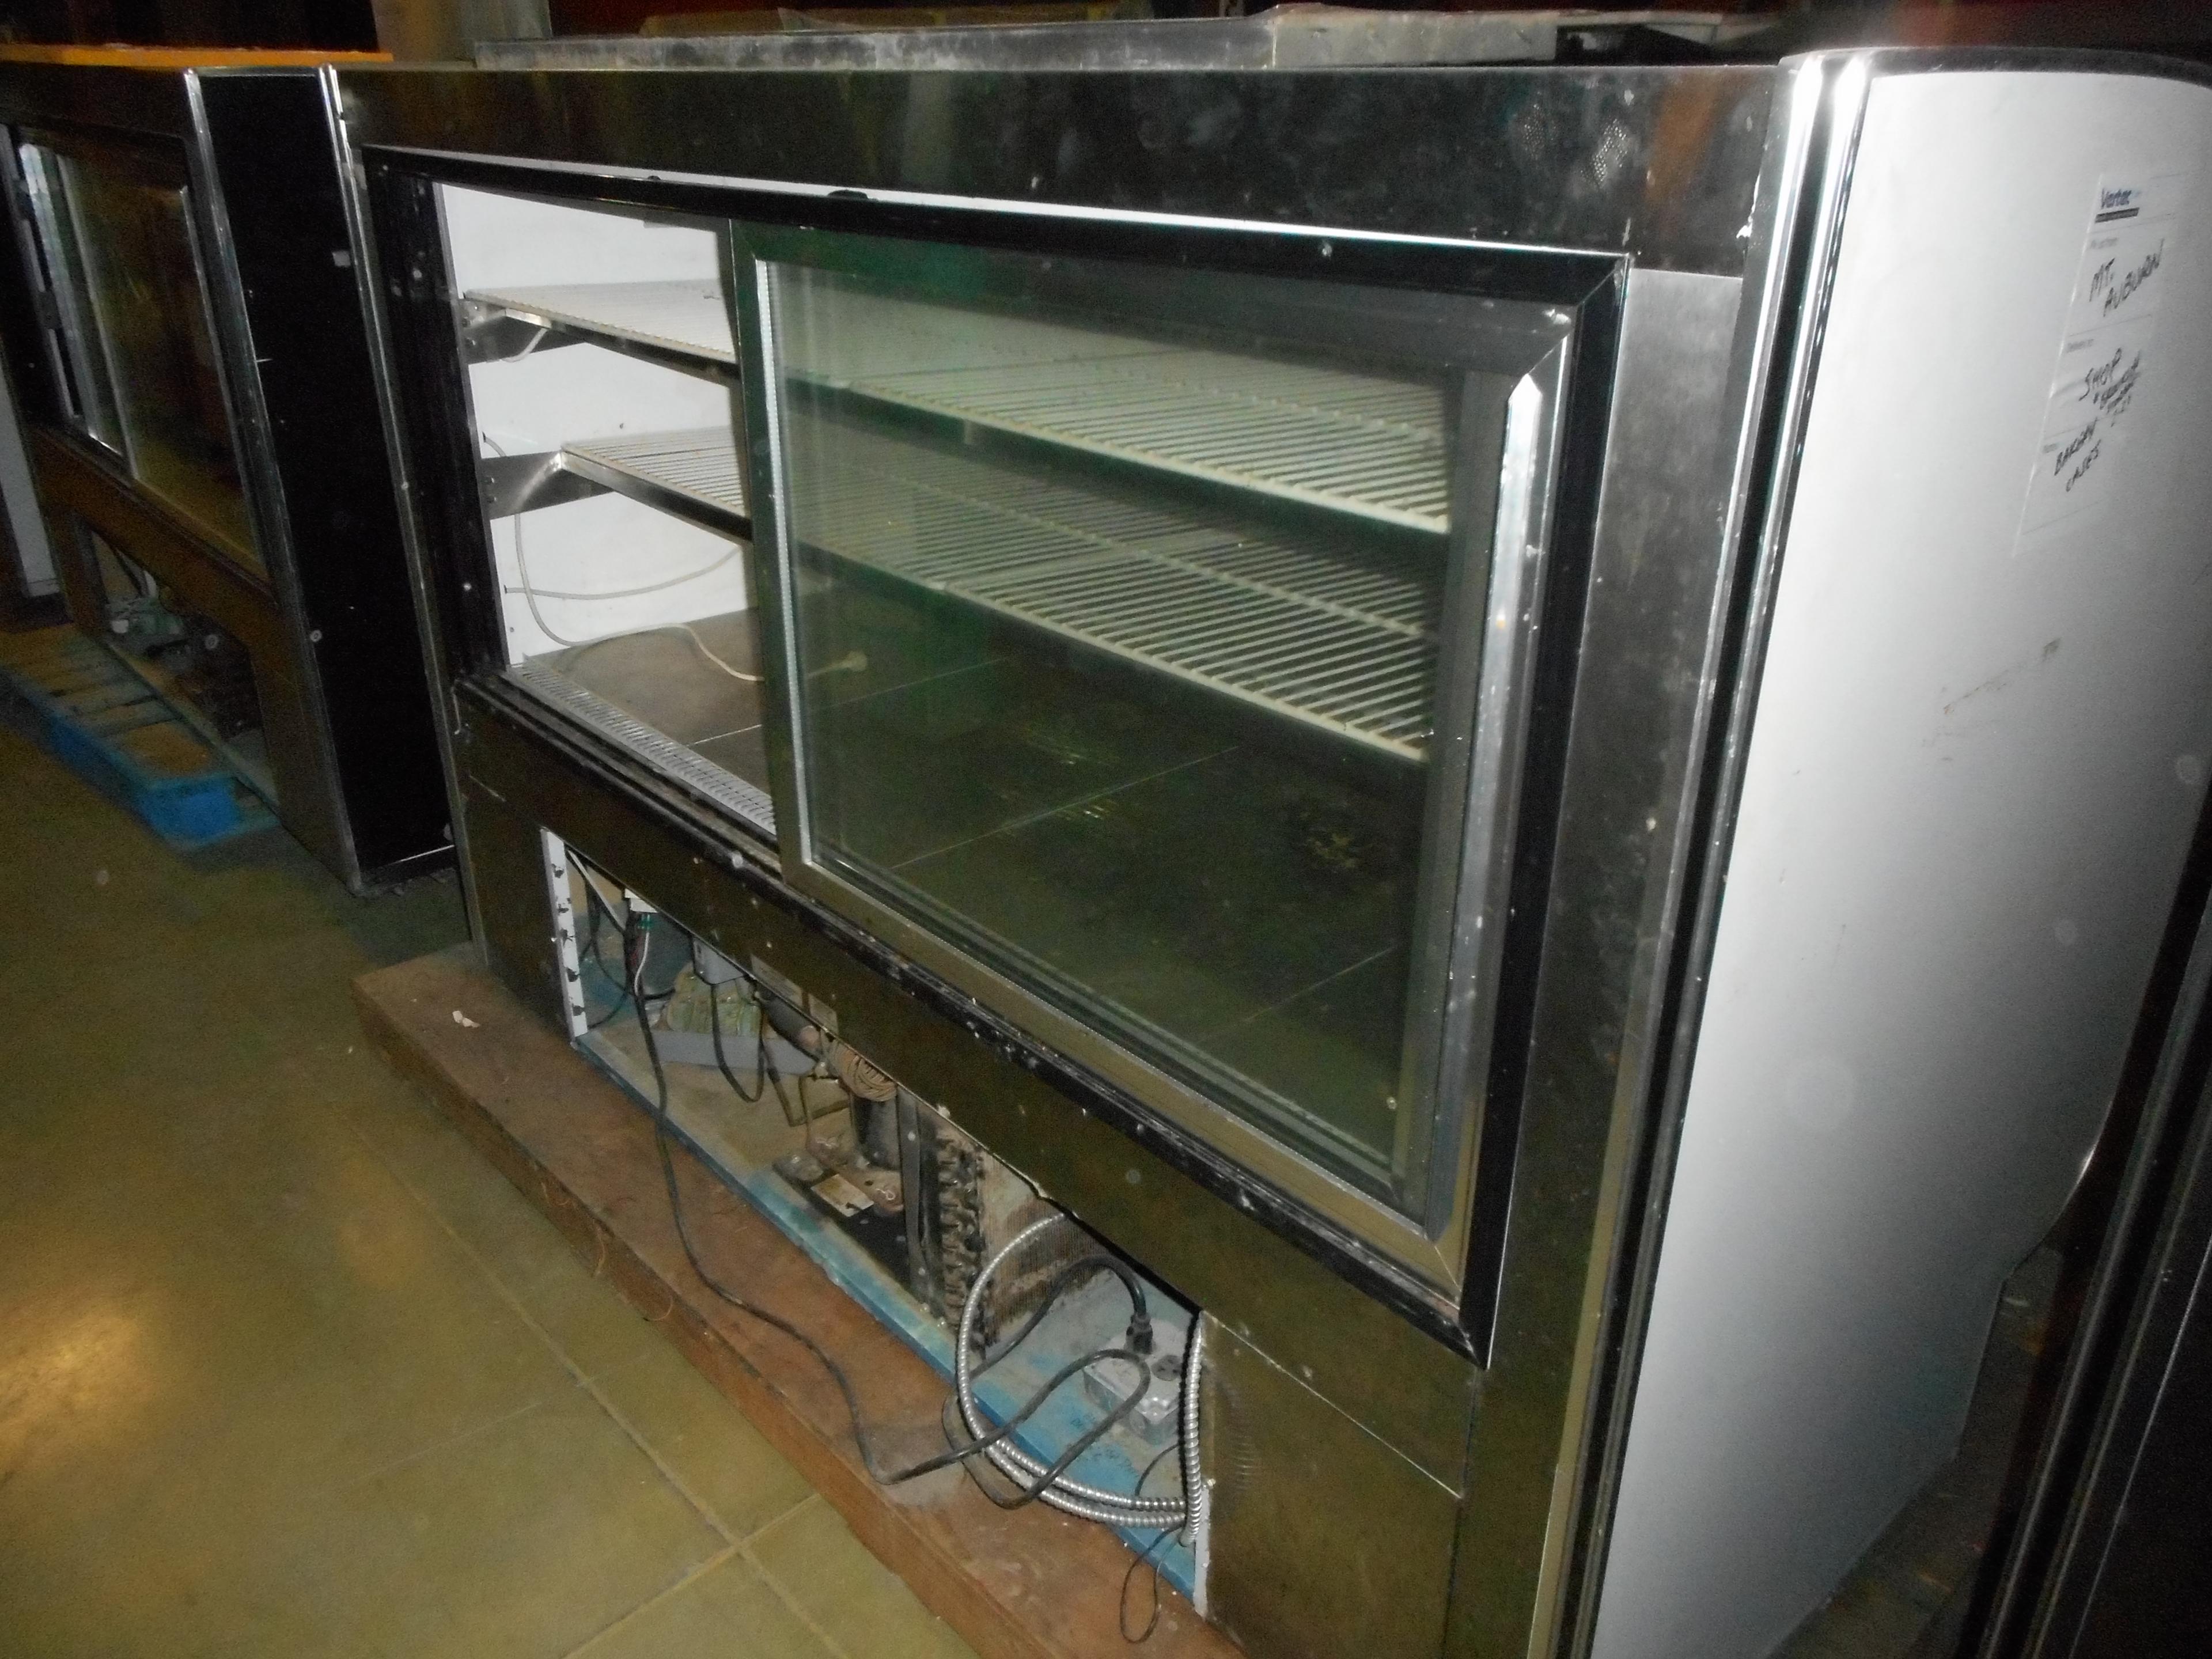 SERVICE BAKERY CASE SELF CONTAINED